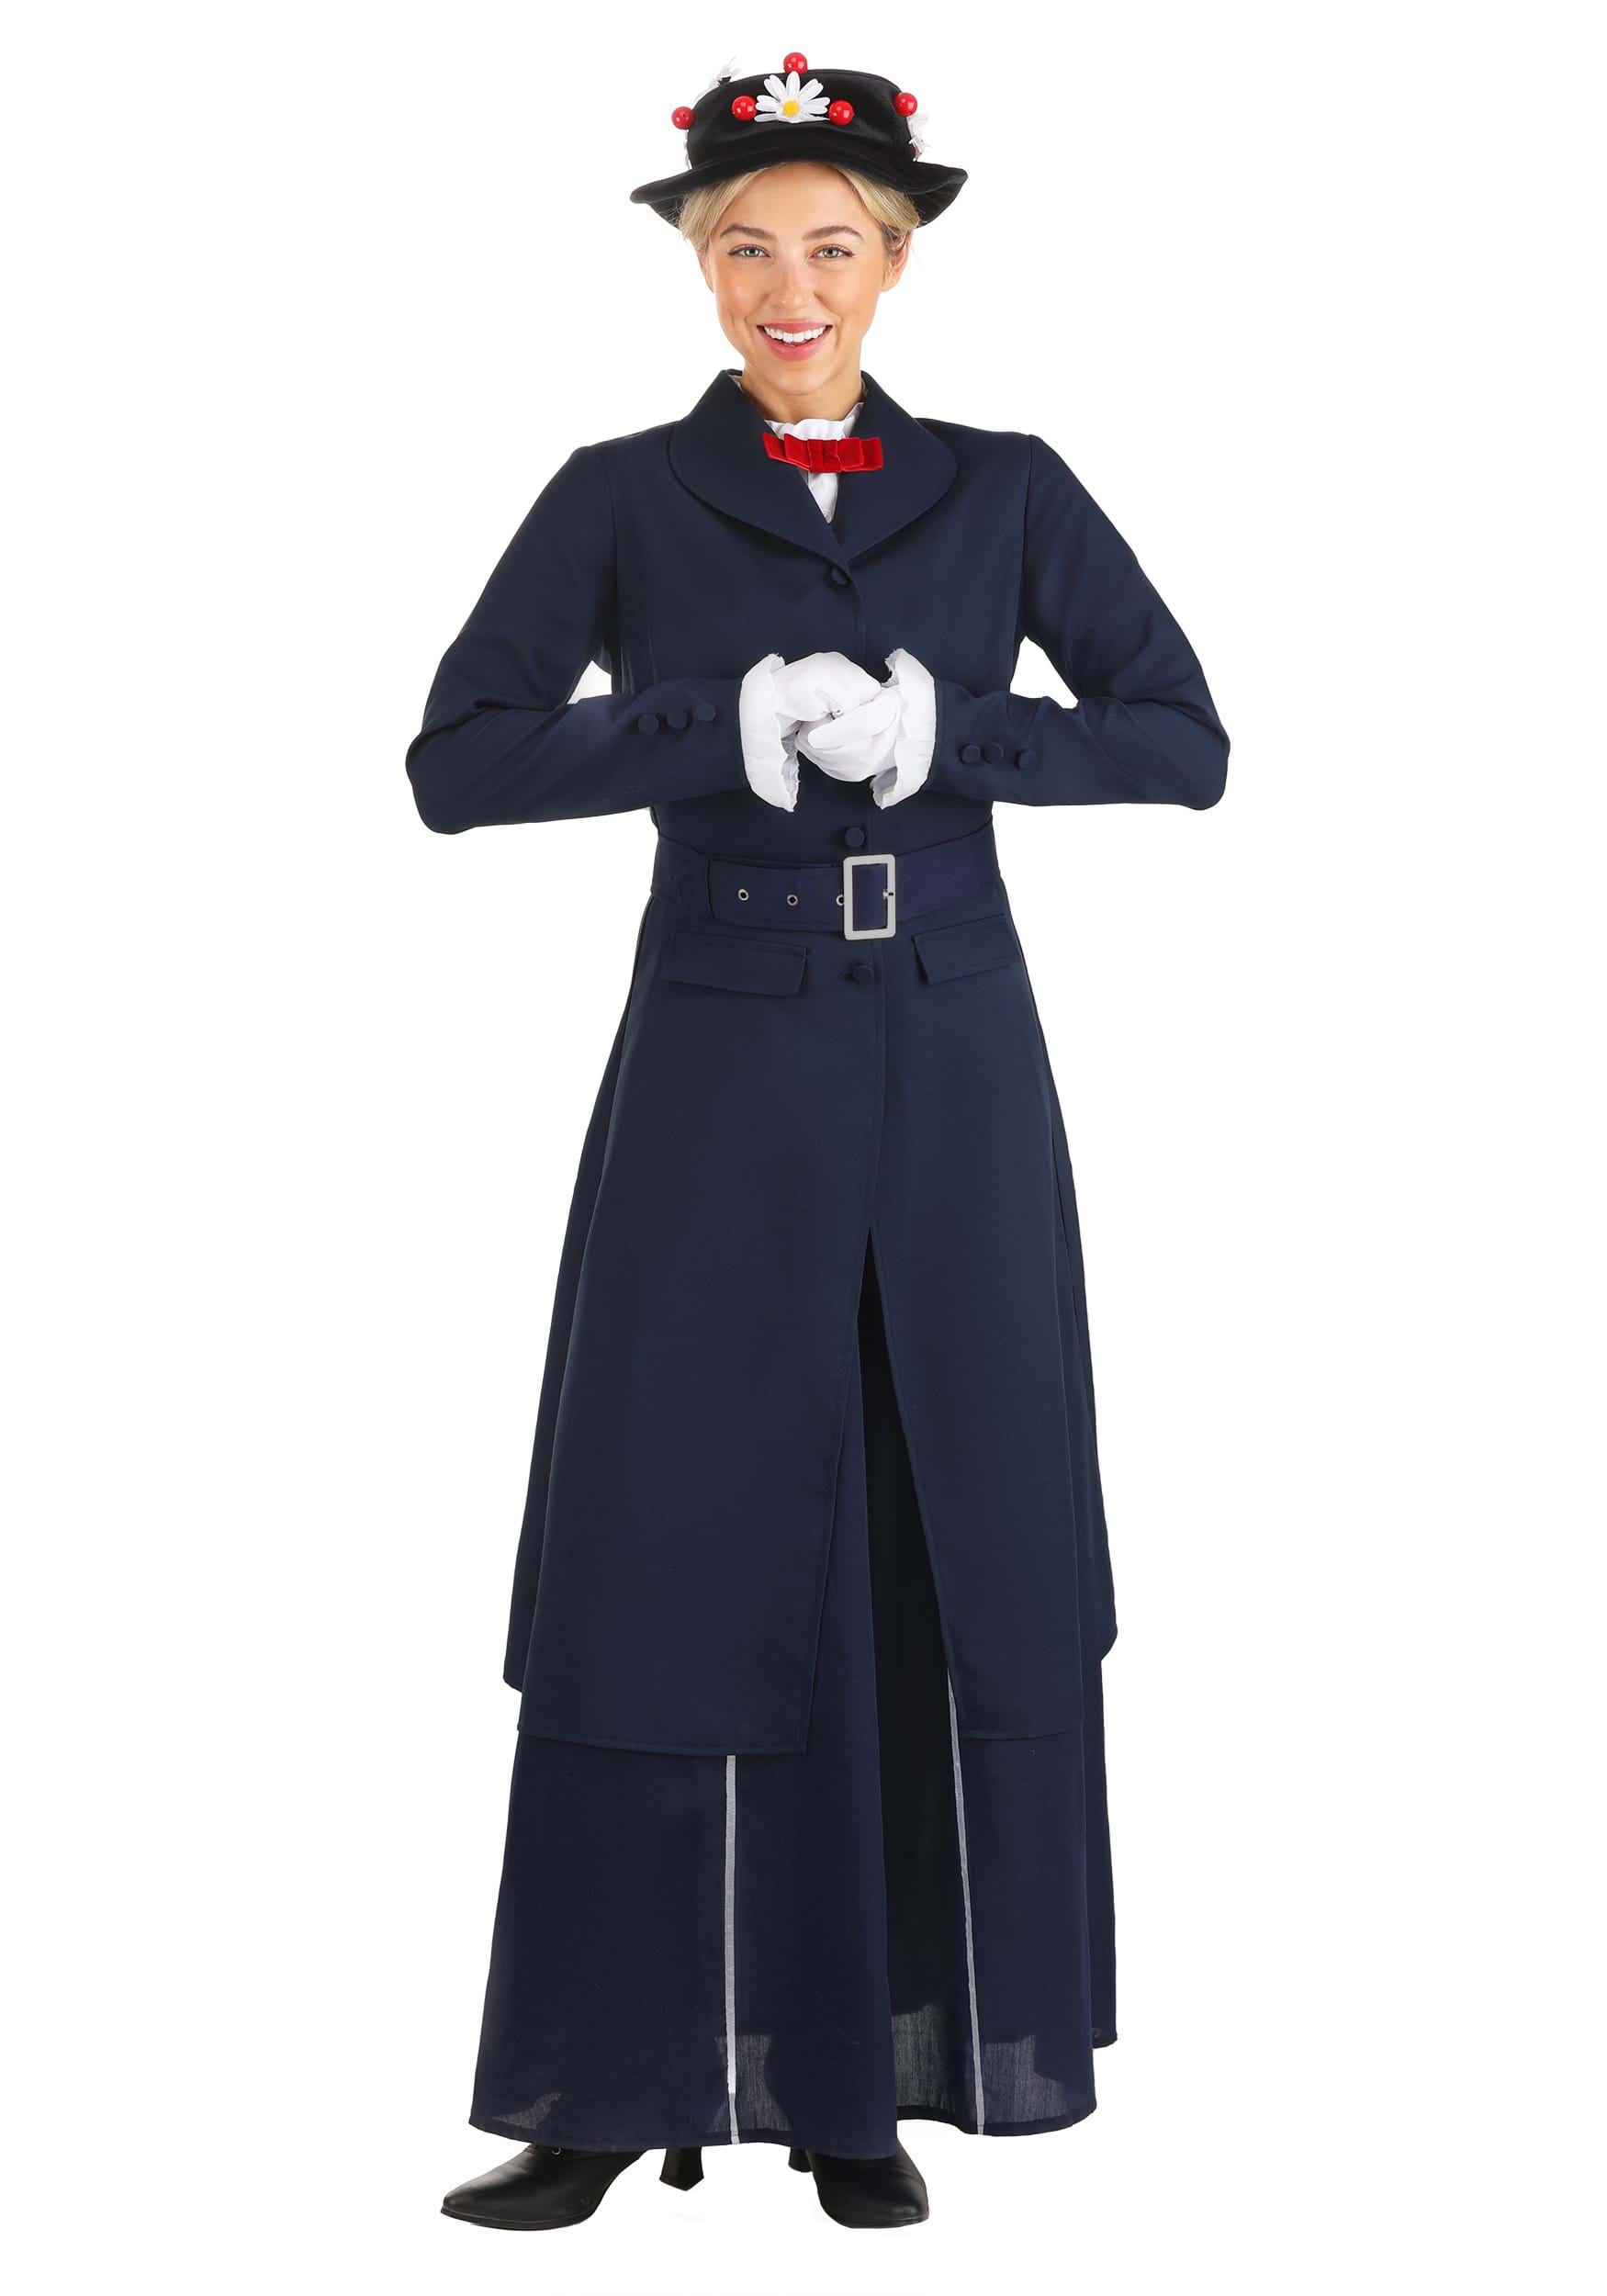 Mary Poppins Costume for Women